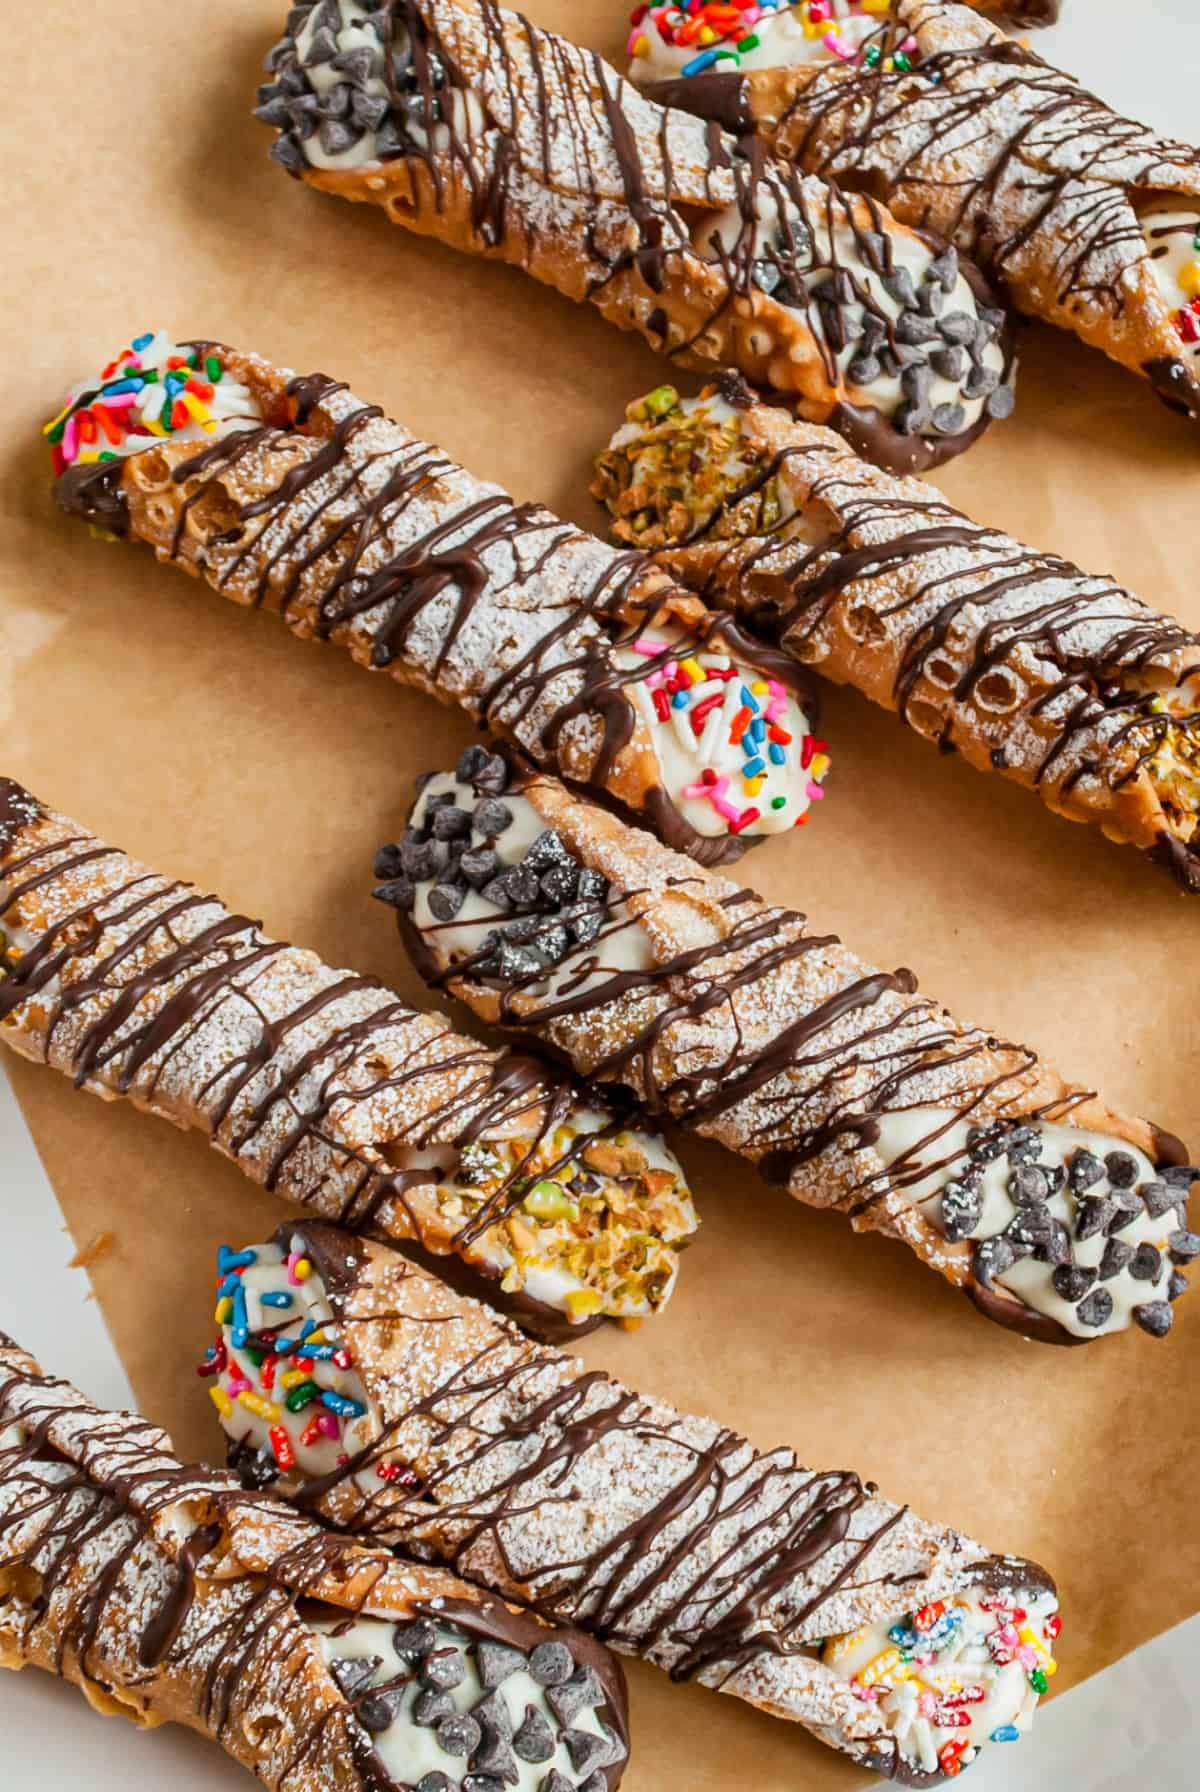 Parchment paper lined with filled cannolis drizzled in chocolate.